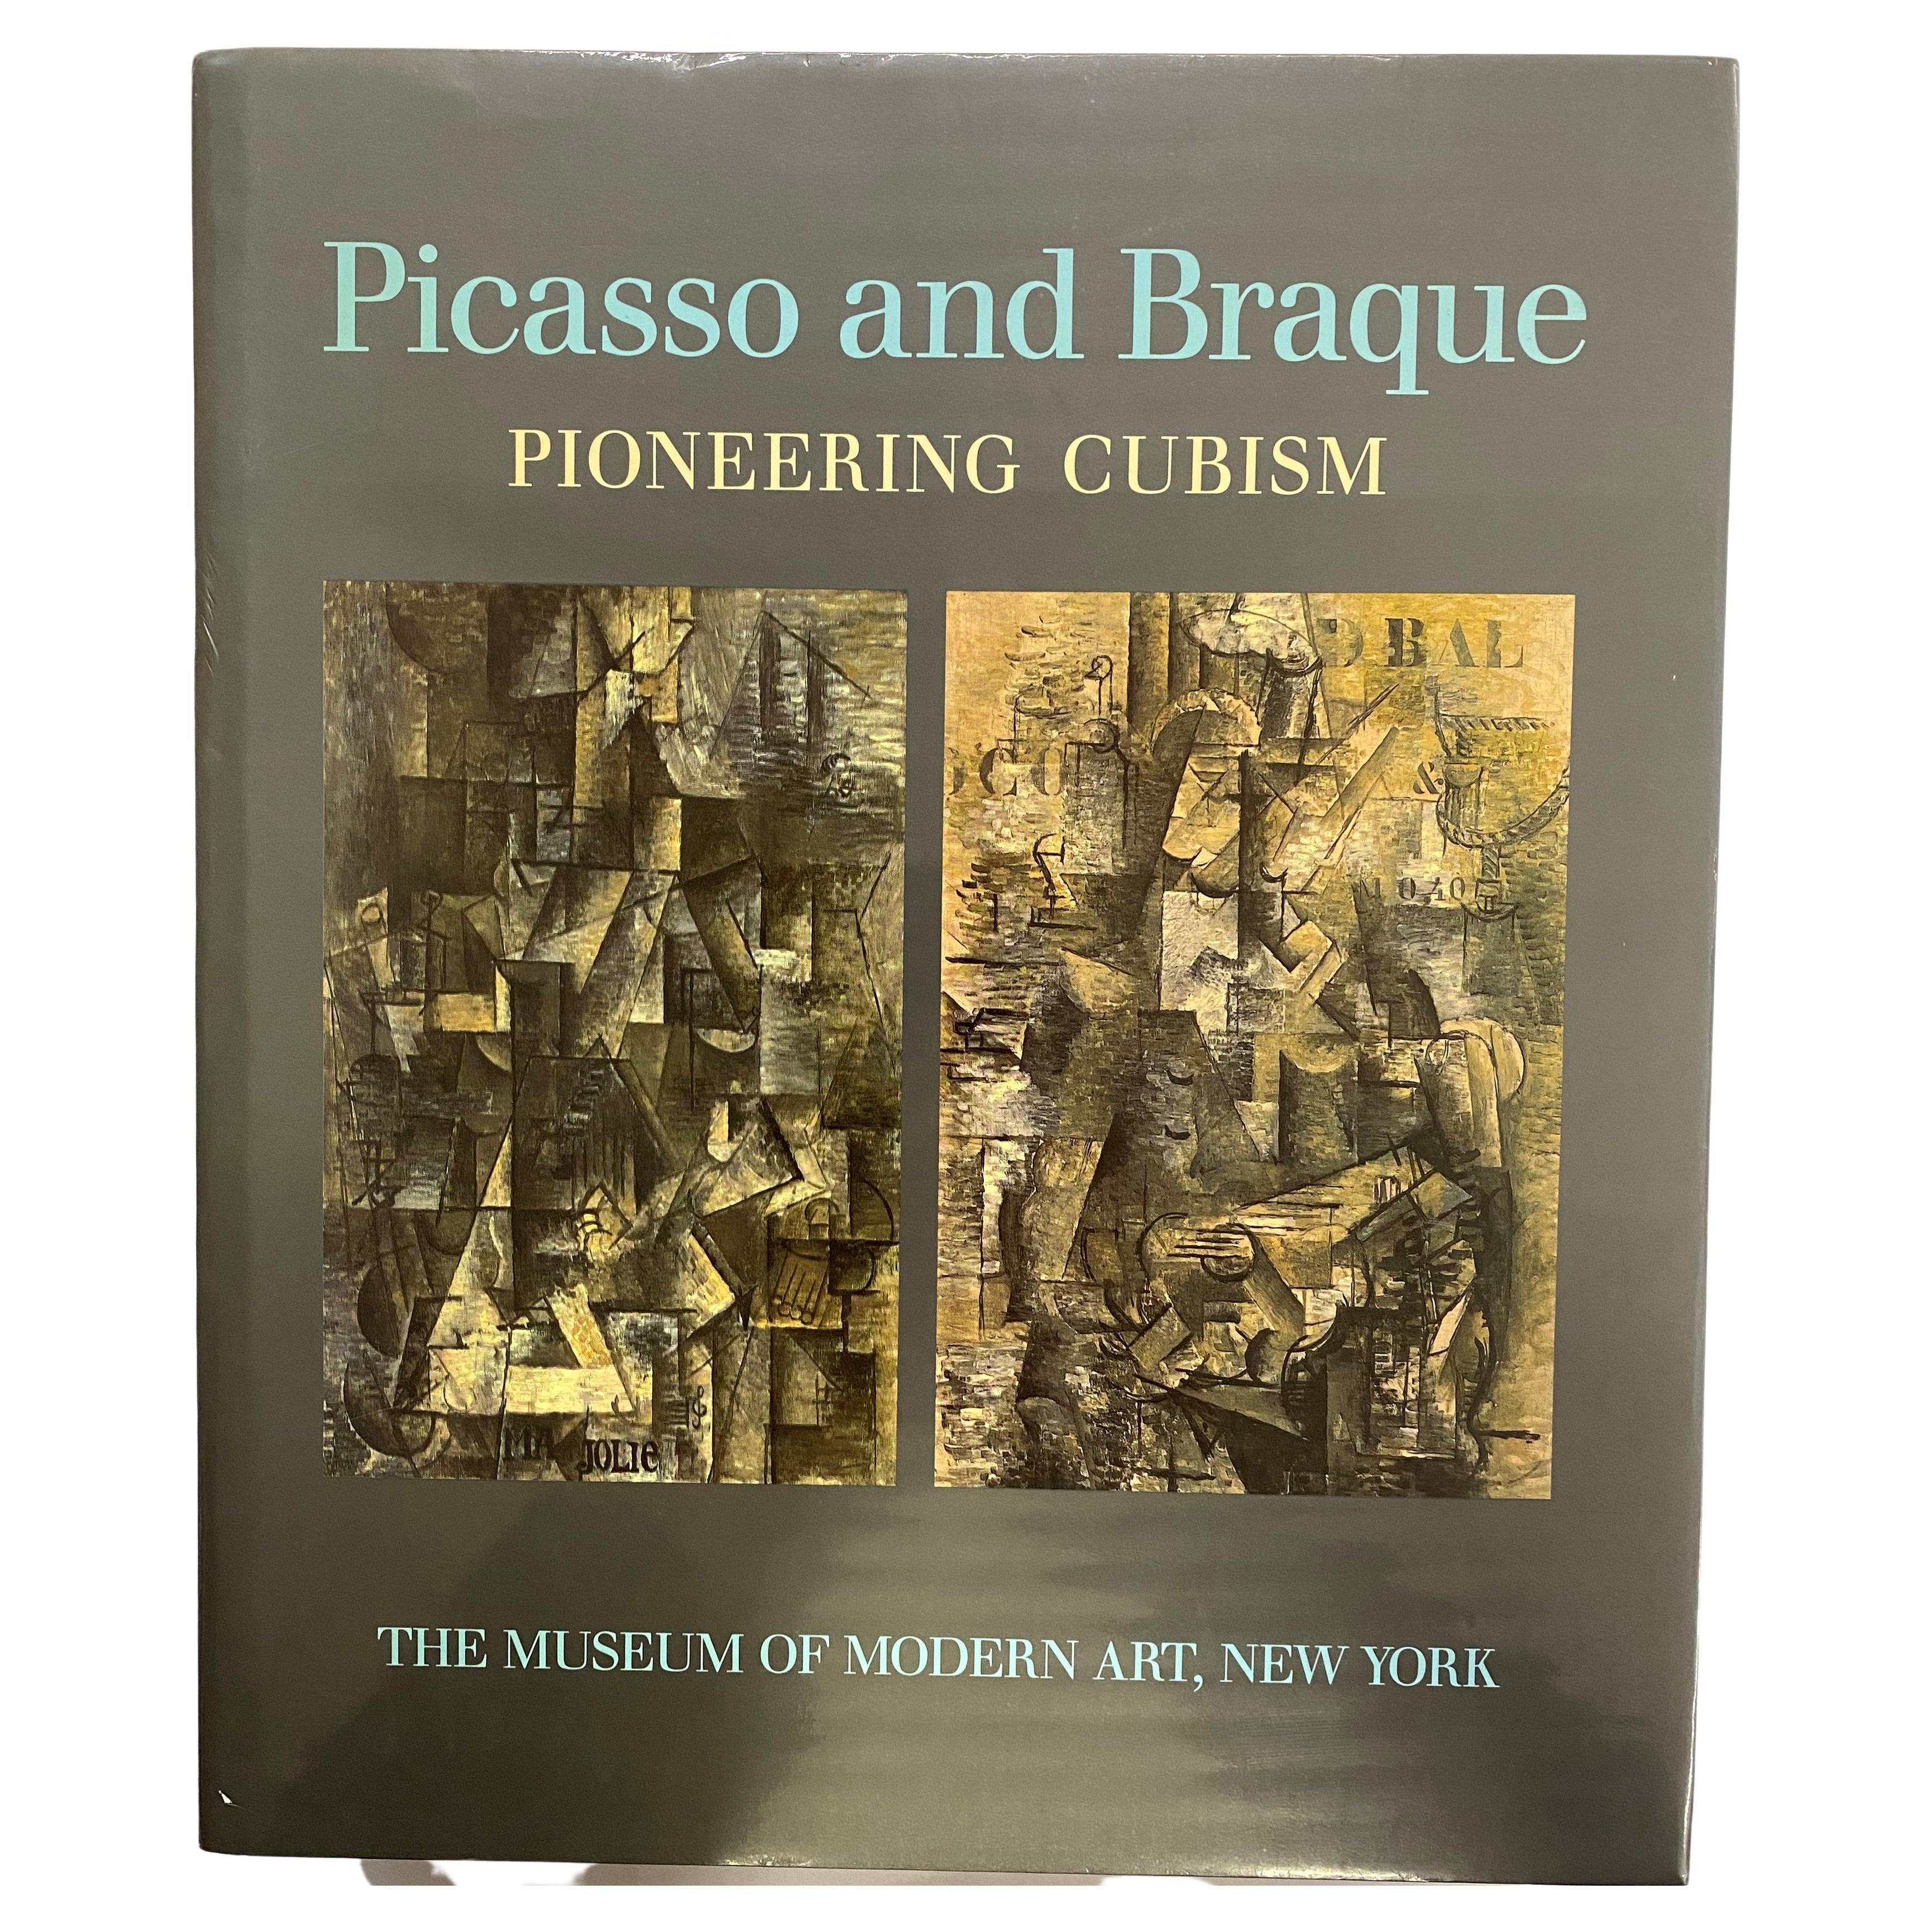 Picasso and Braque, Pioneering Cubism by William Rubin (Book) For Sale